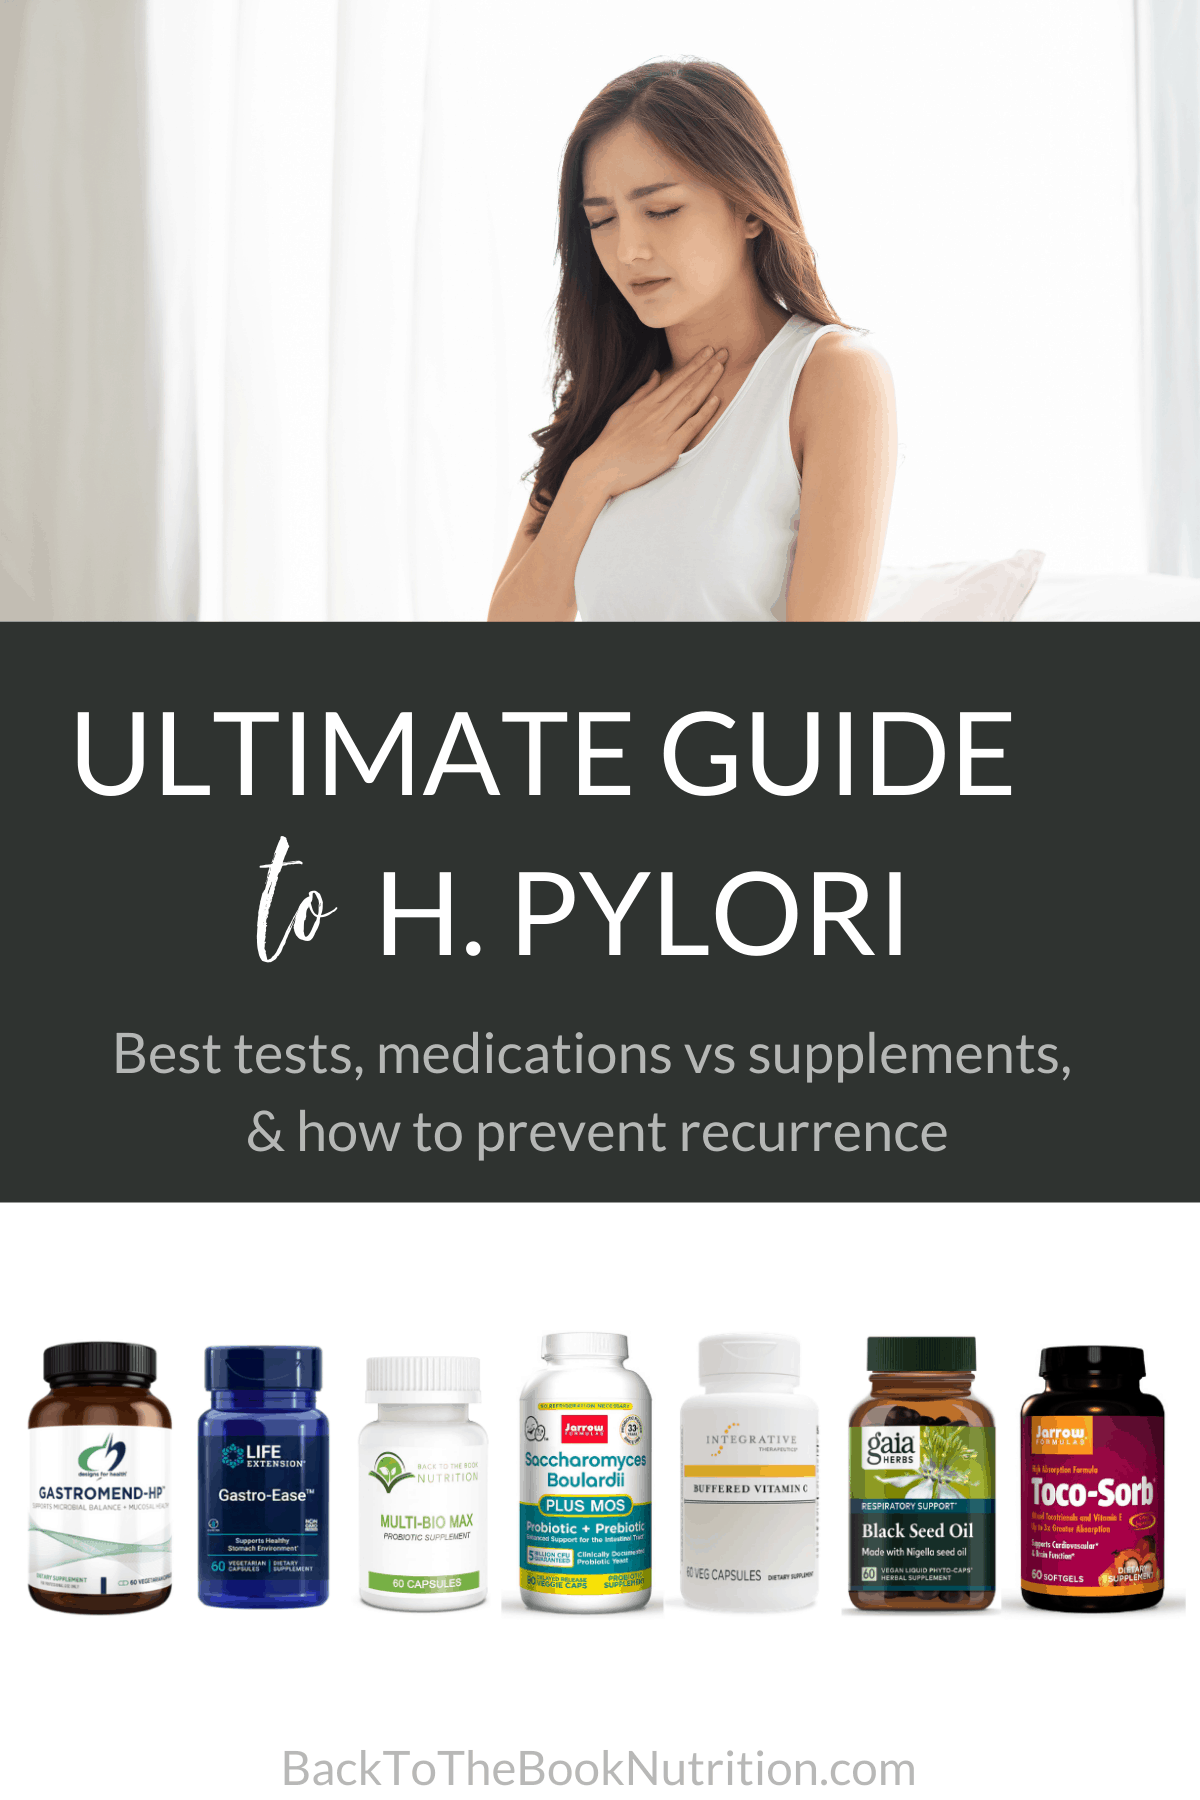 Collage - image of woman with hand over hear throat due to reflux, dietary supplements for H. pylori, and title text overlay